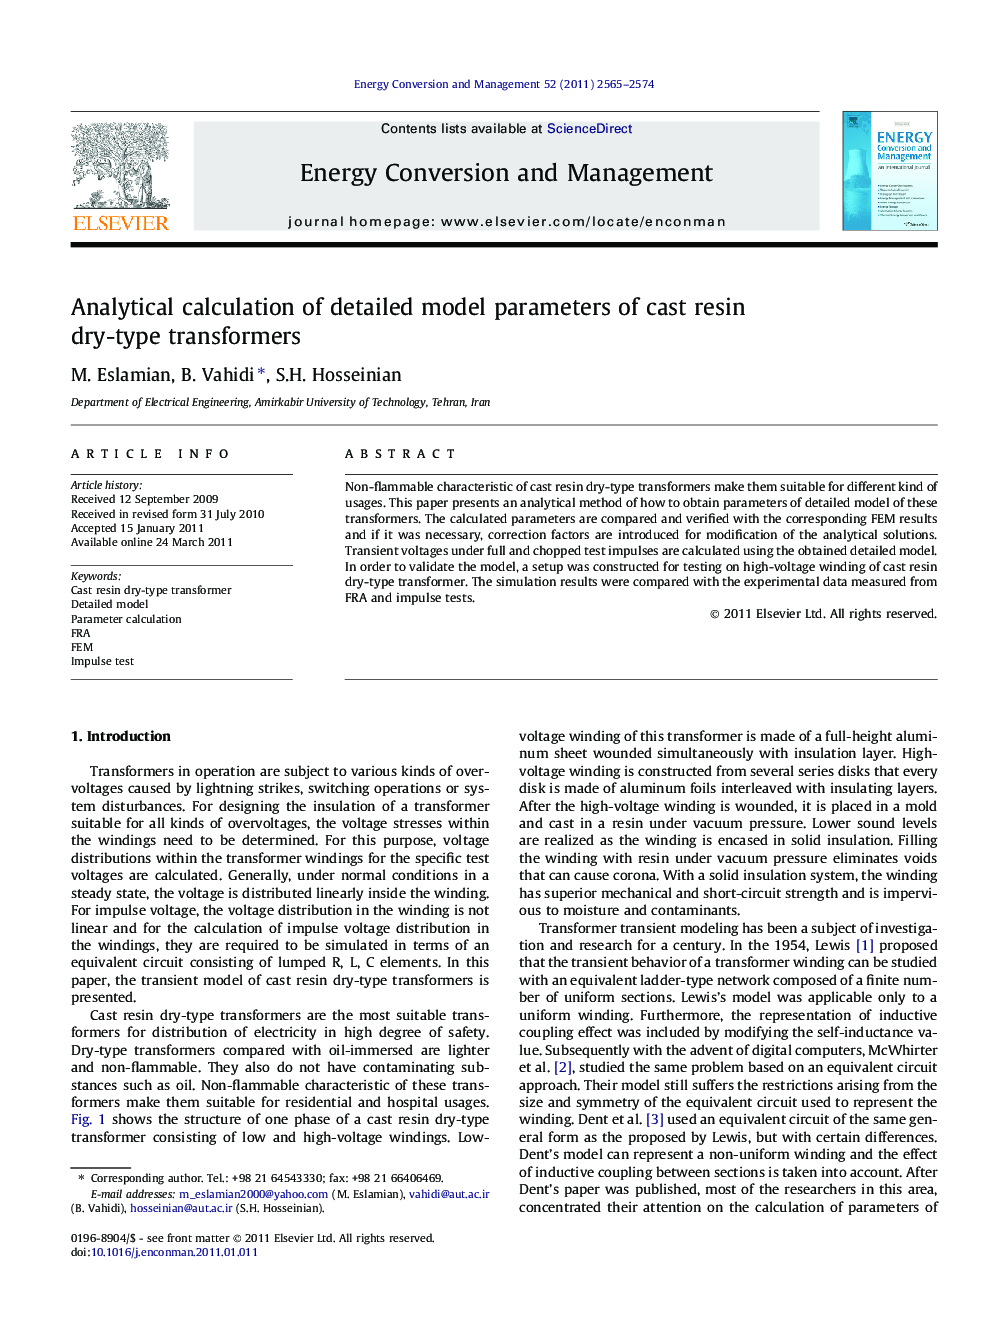 Analytical calculation of detailed model parameters of cast resin dry-type transformers